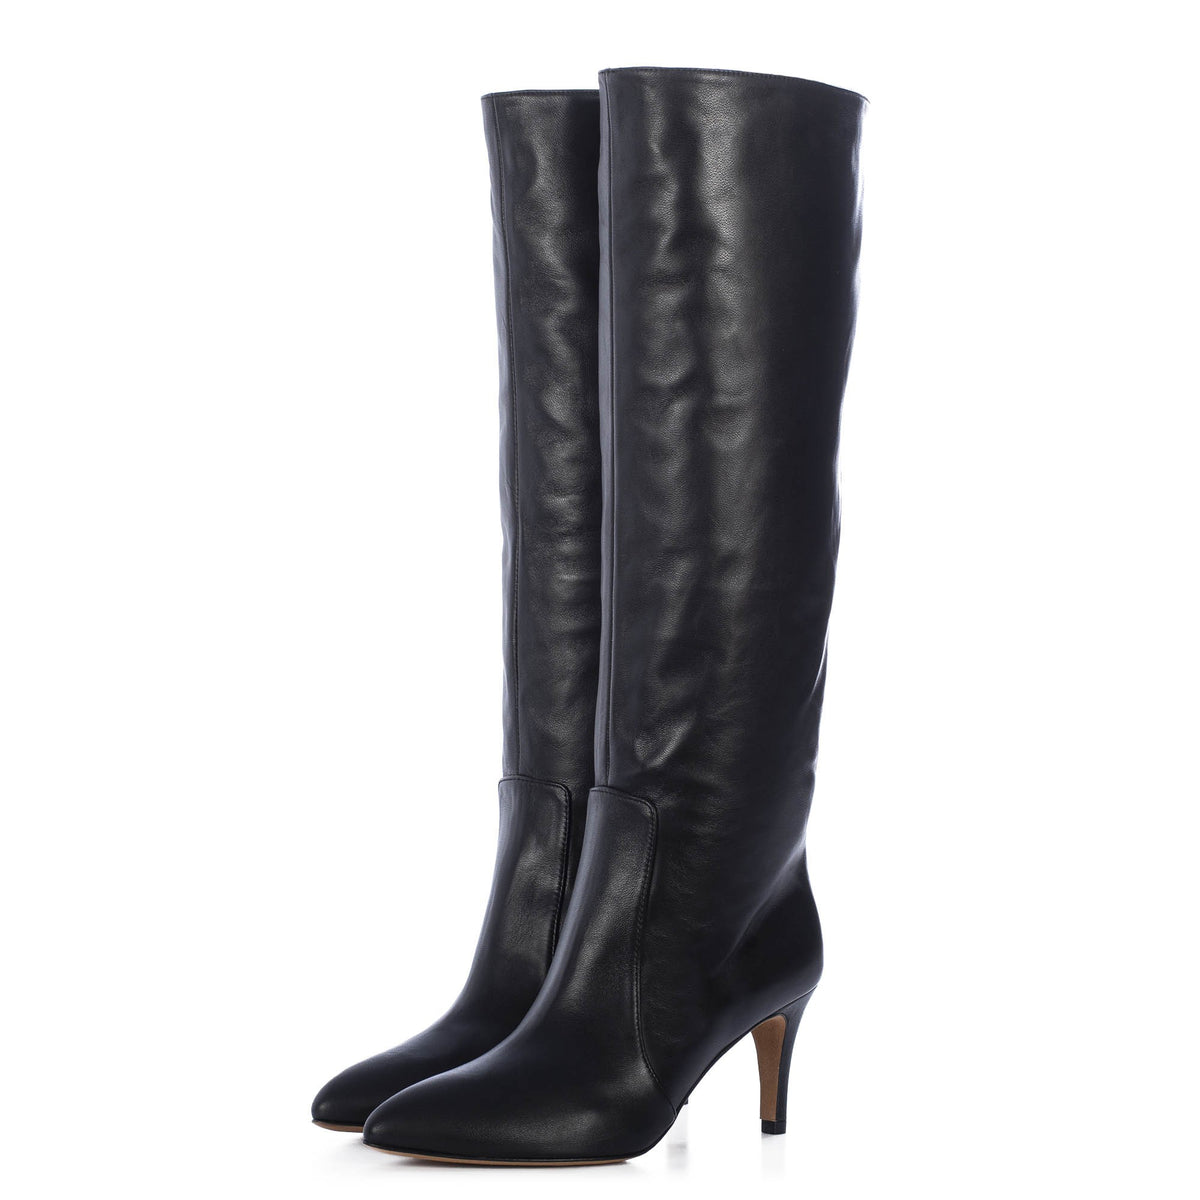 TORAL BLACK LEATHER TALL BOOTS – Toral